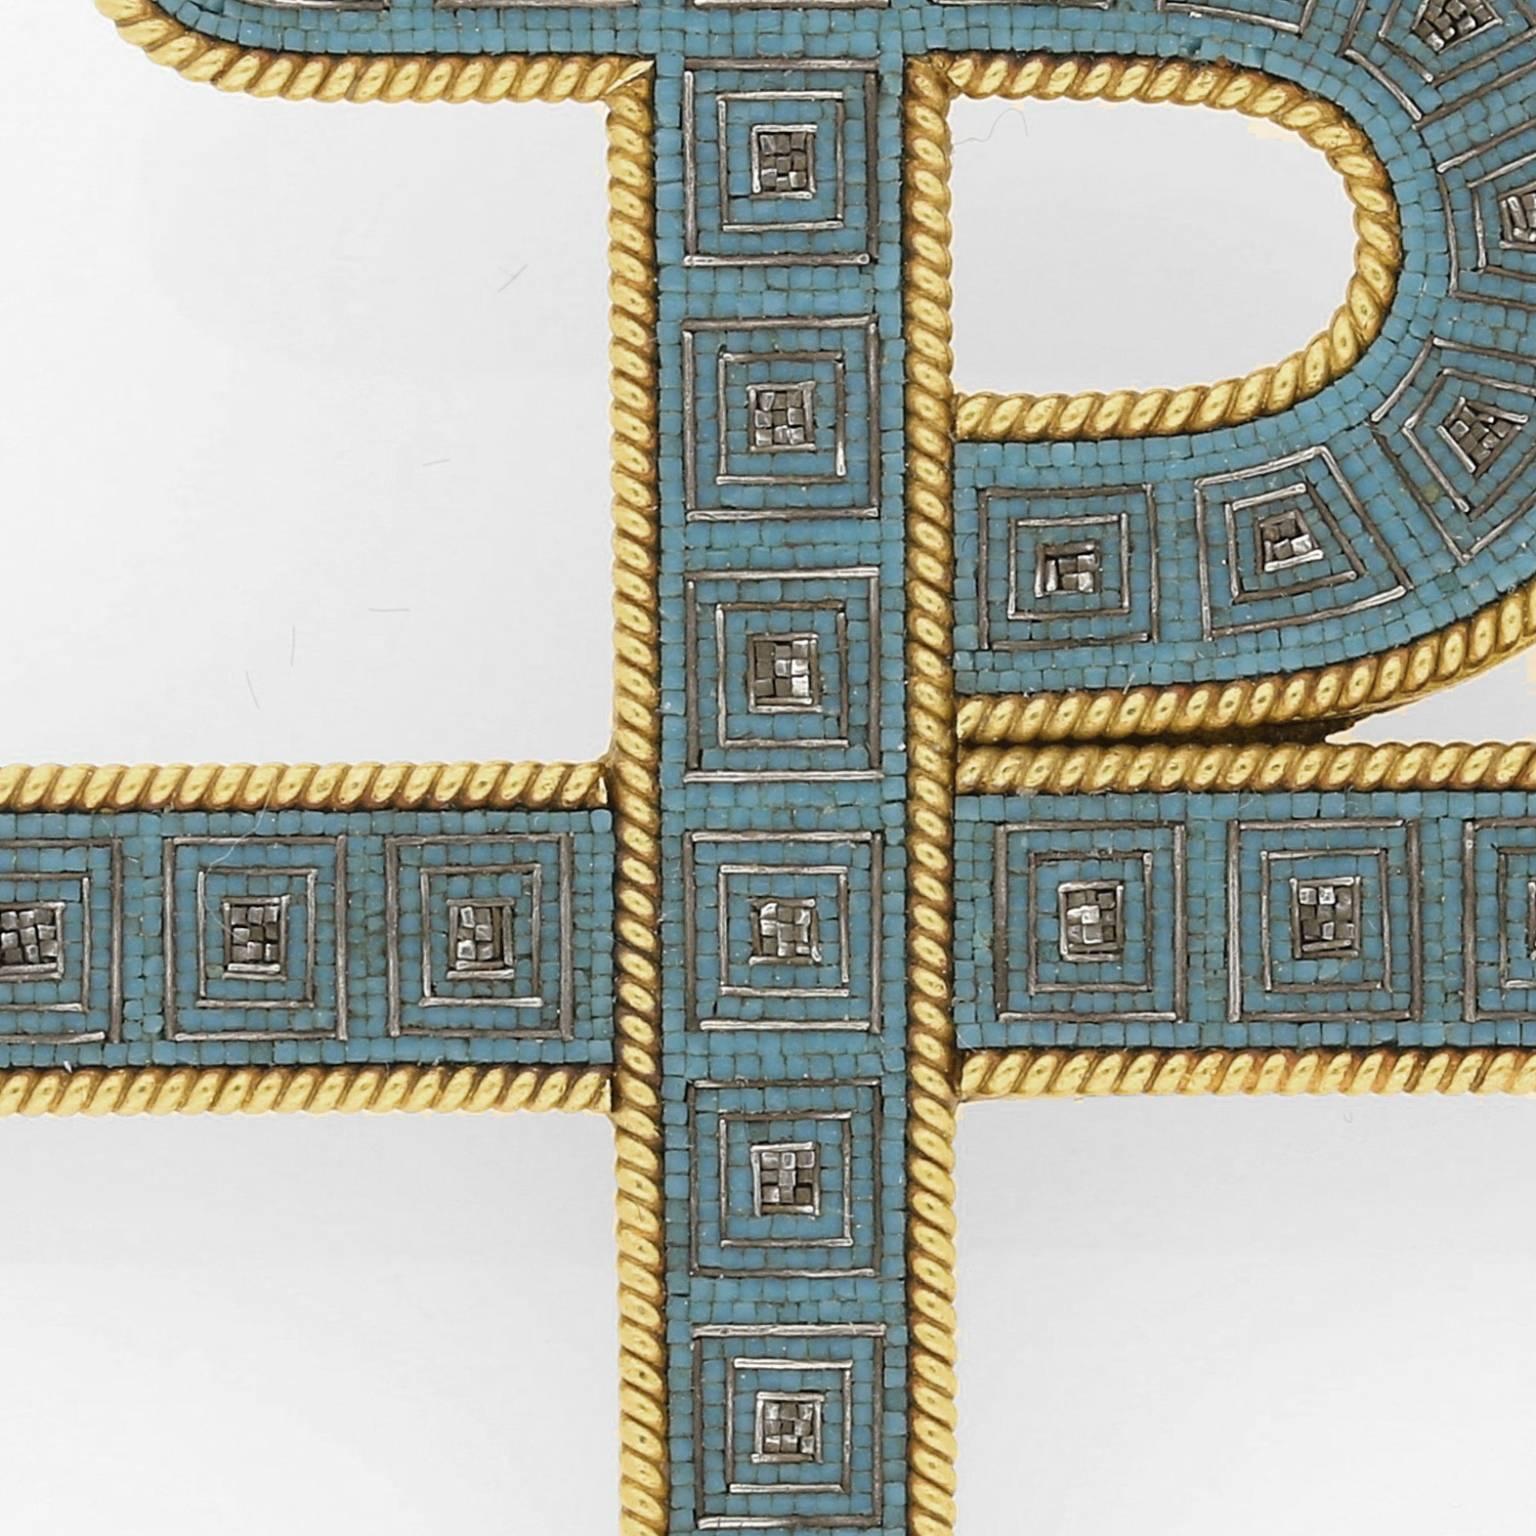 The exceptionally crafted brooch of staurogram form depicting the overlapping Greek letters T ‘tau’ and P ‘rho’ in yellow gold set throughout with an exquisitely fine micromosaic pattern in blue and silver colour tesserae within a gold twisted